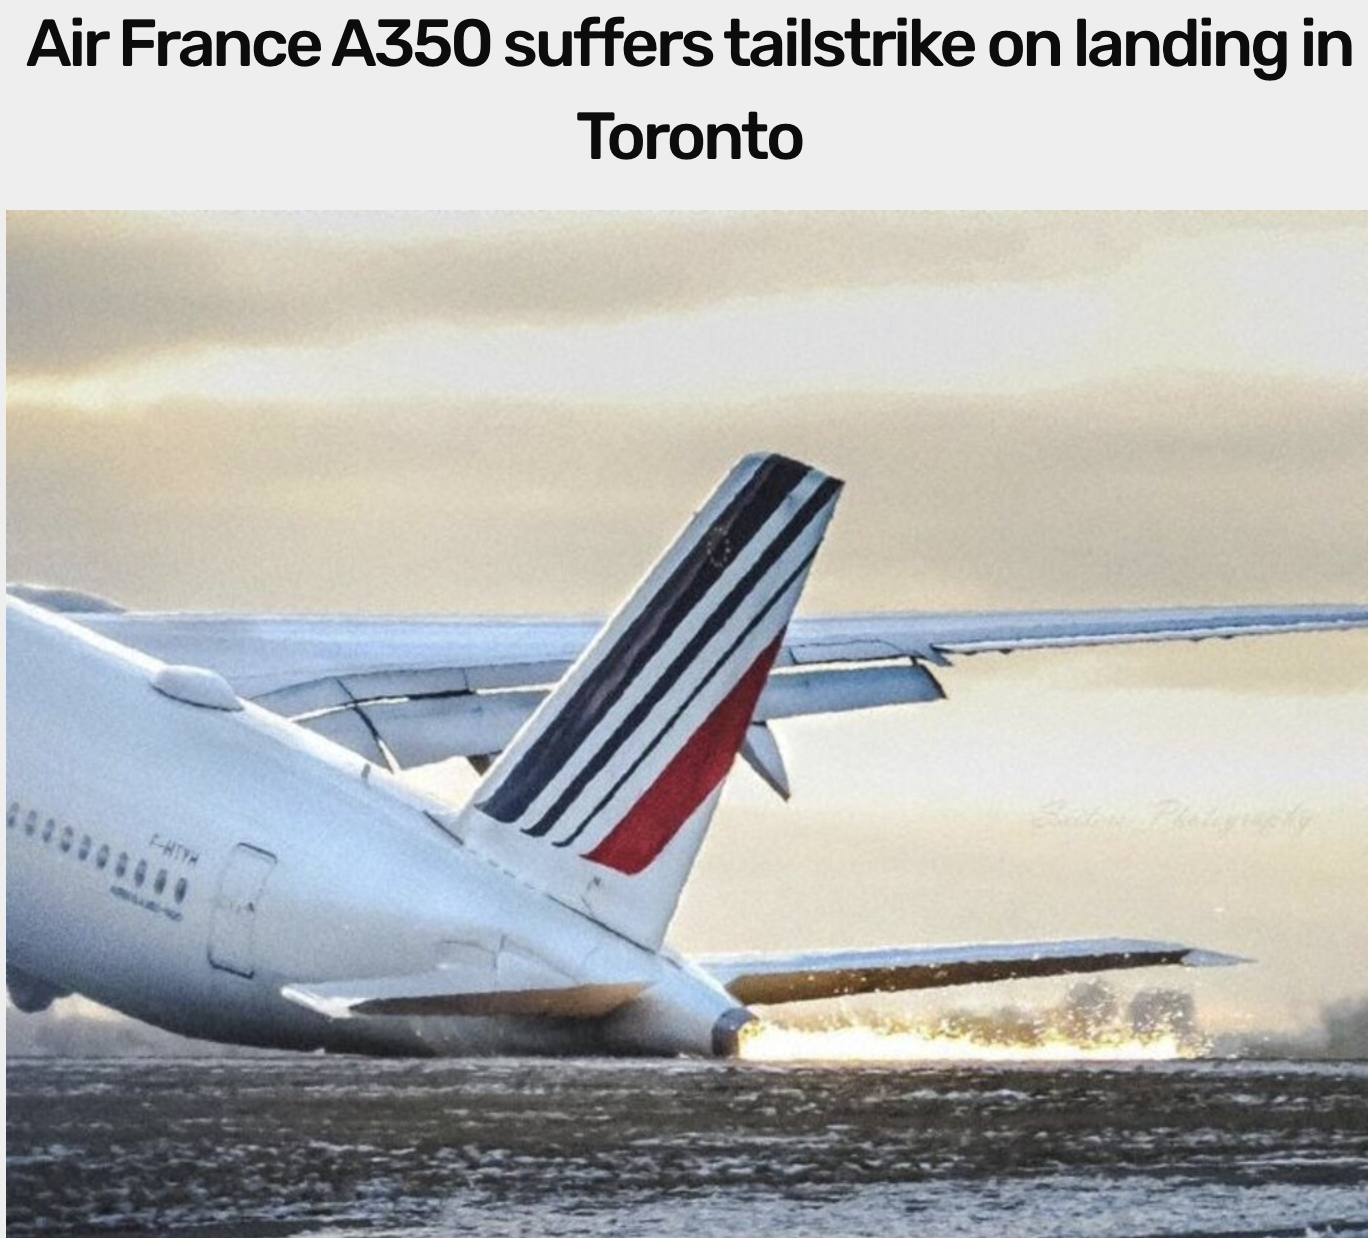 airline - Air France A350 suffers tailstrike on landing in Toronto Ple